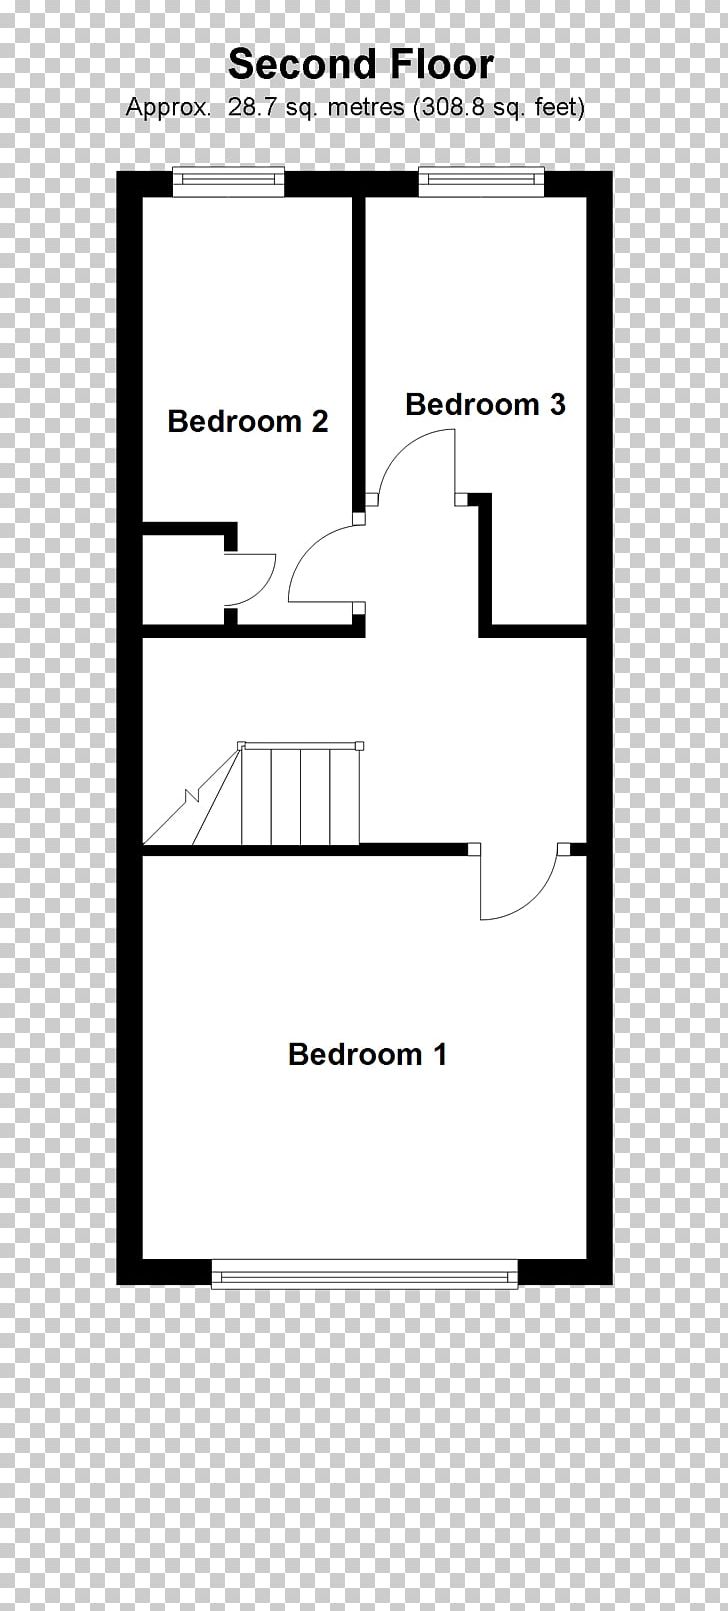 ЖК "Две Эпохи" Apartment Storey Floor Plan Building PNG, Clipart, Angle, Apartment, Area, Bedroom, Black And White Free PNG Download